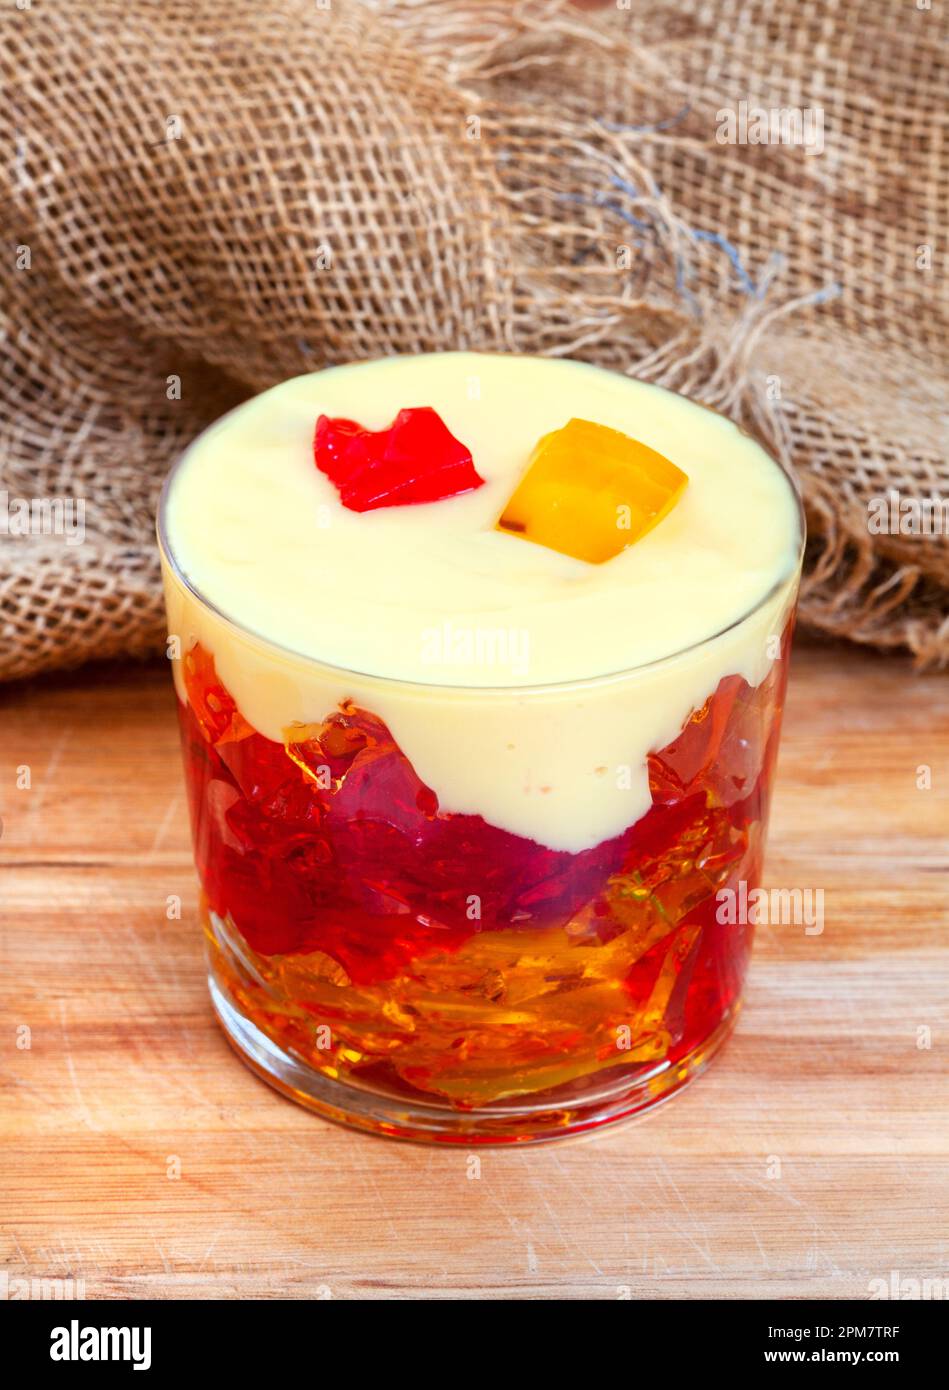 jelly and custard in glass cup on rustic surface with burlap Stock Photo